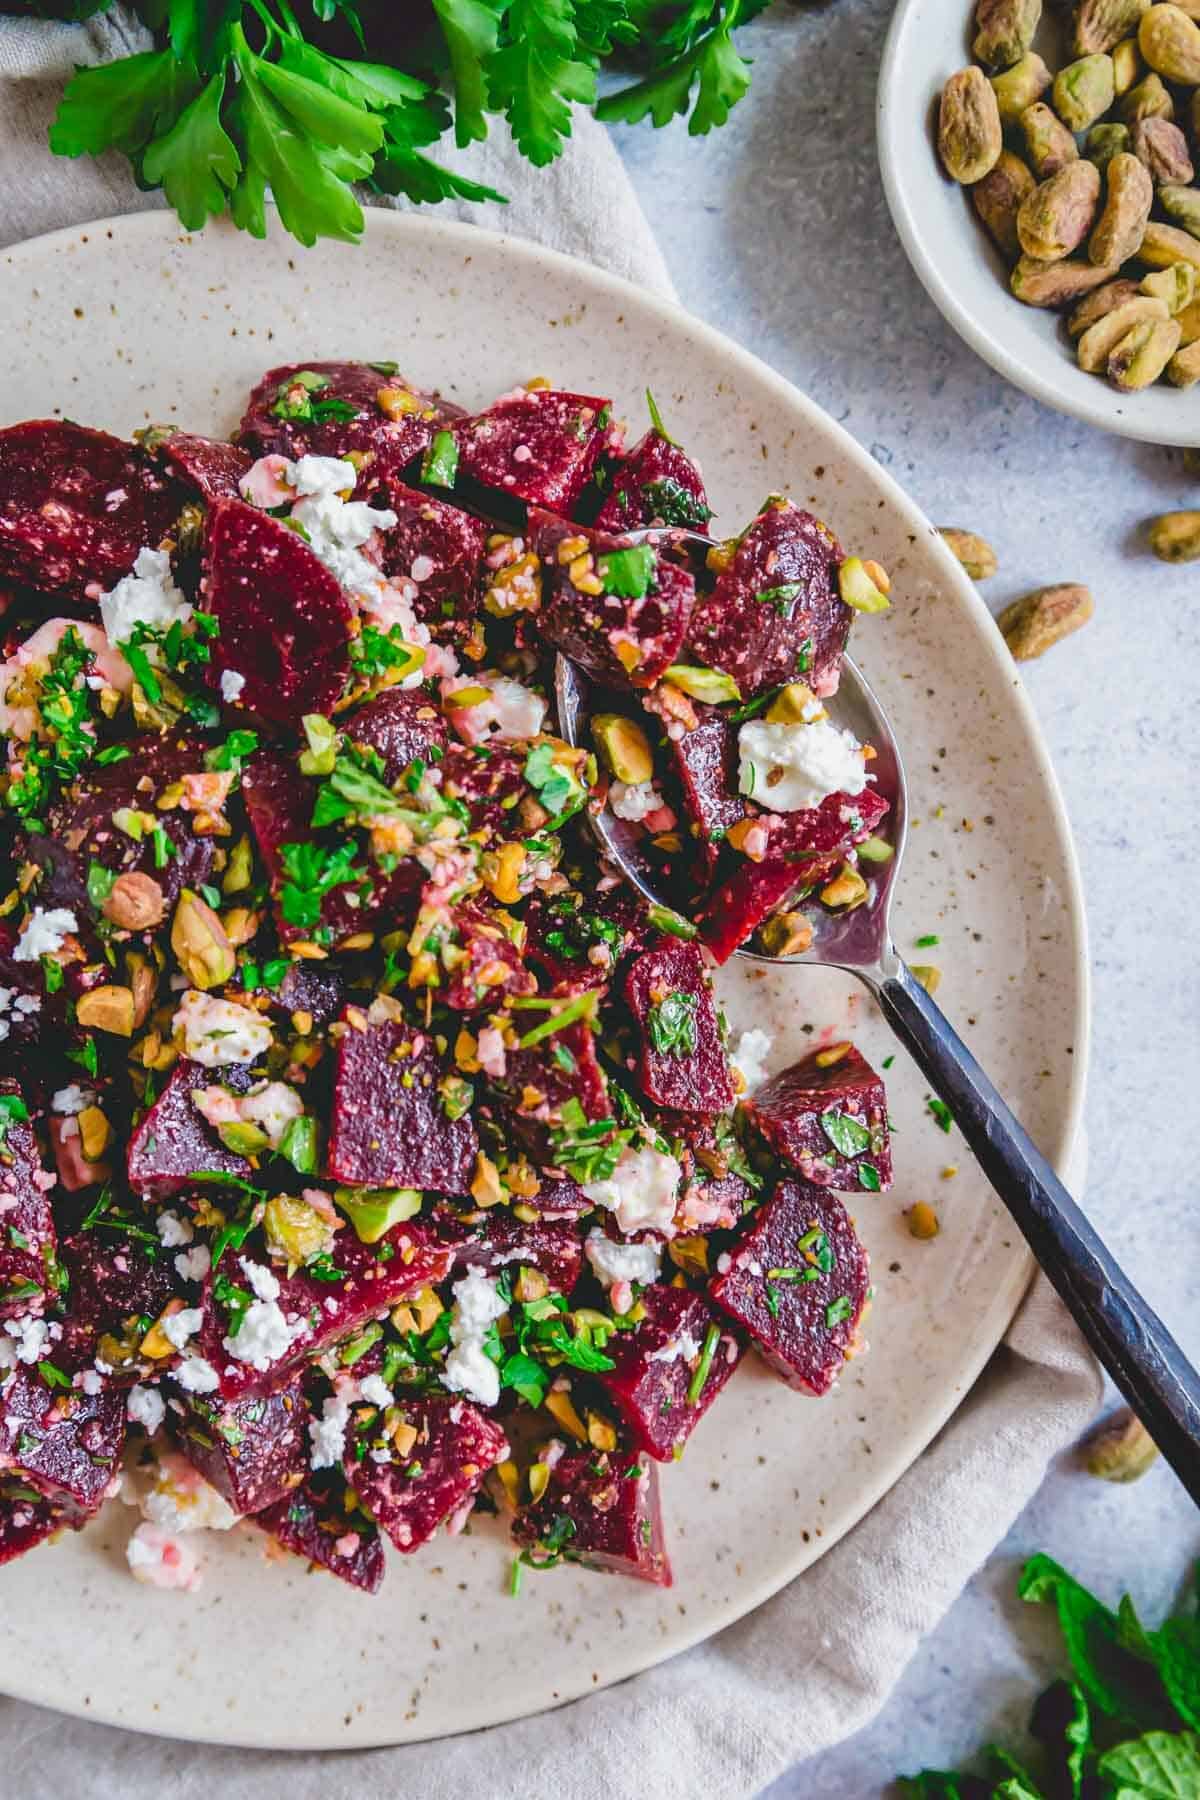 Beet salad with feta, pistachios, fresh herbs and a lemon olive oil dressing on a plate with a black metal spoon.